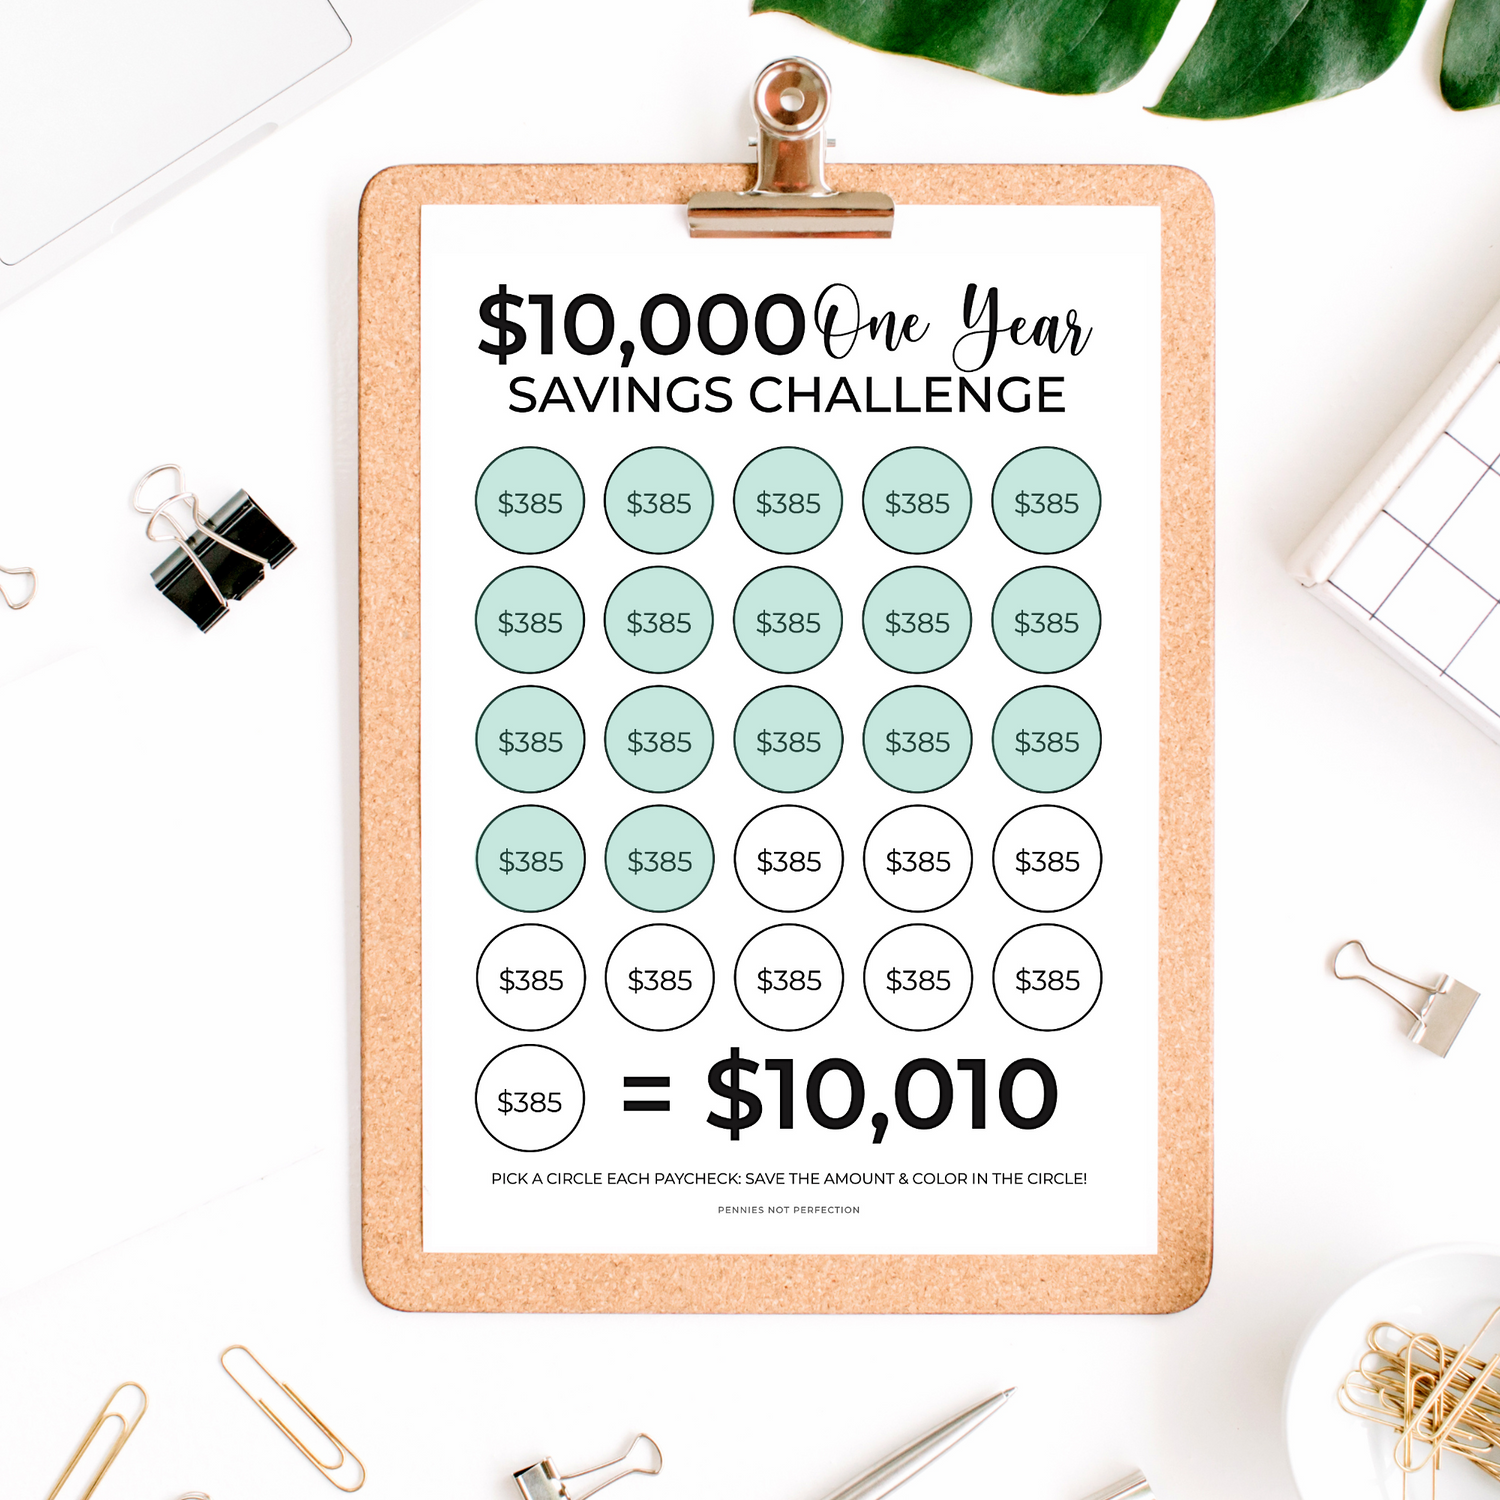 52 Week Money Challenge To $5 K: Weekly Savings Tracker To Help You Save  $5,000 In A Year